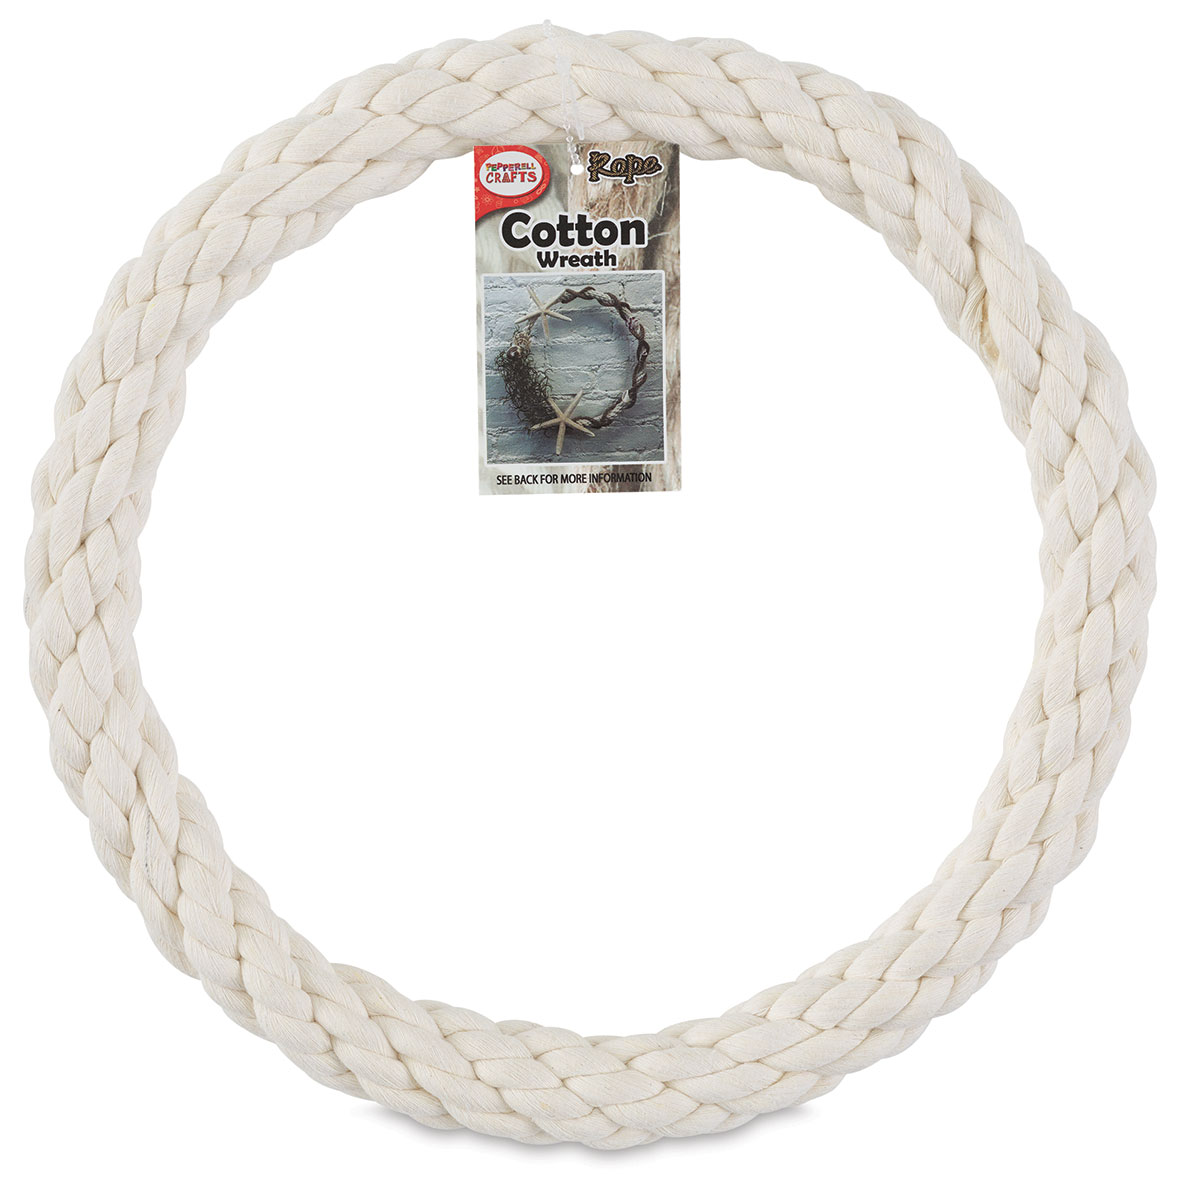 Pepperell Craft Natural Cotton Rope Wreath